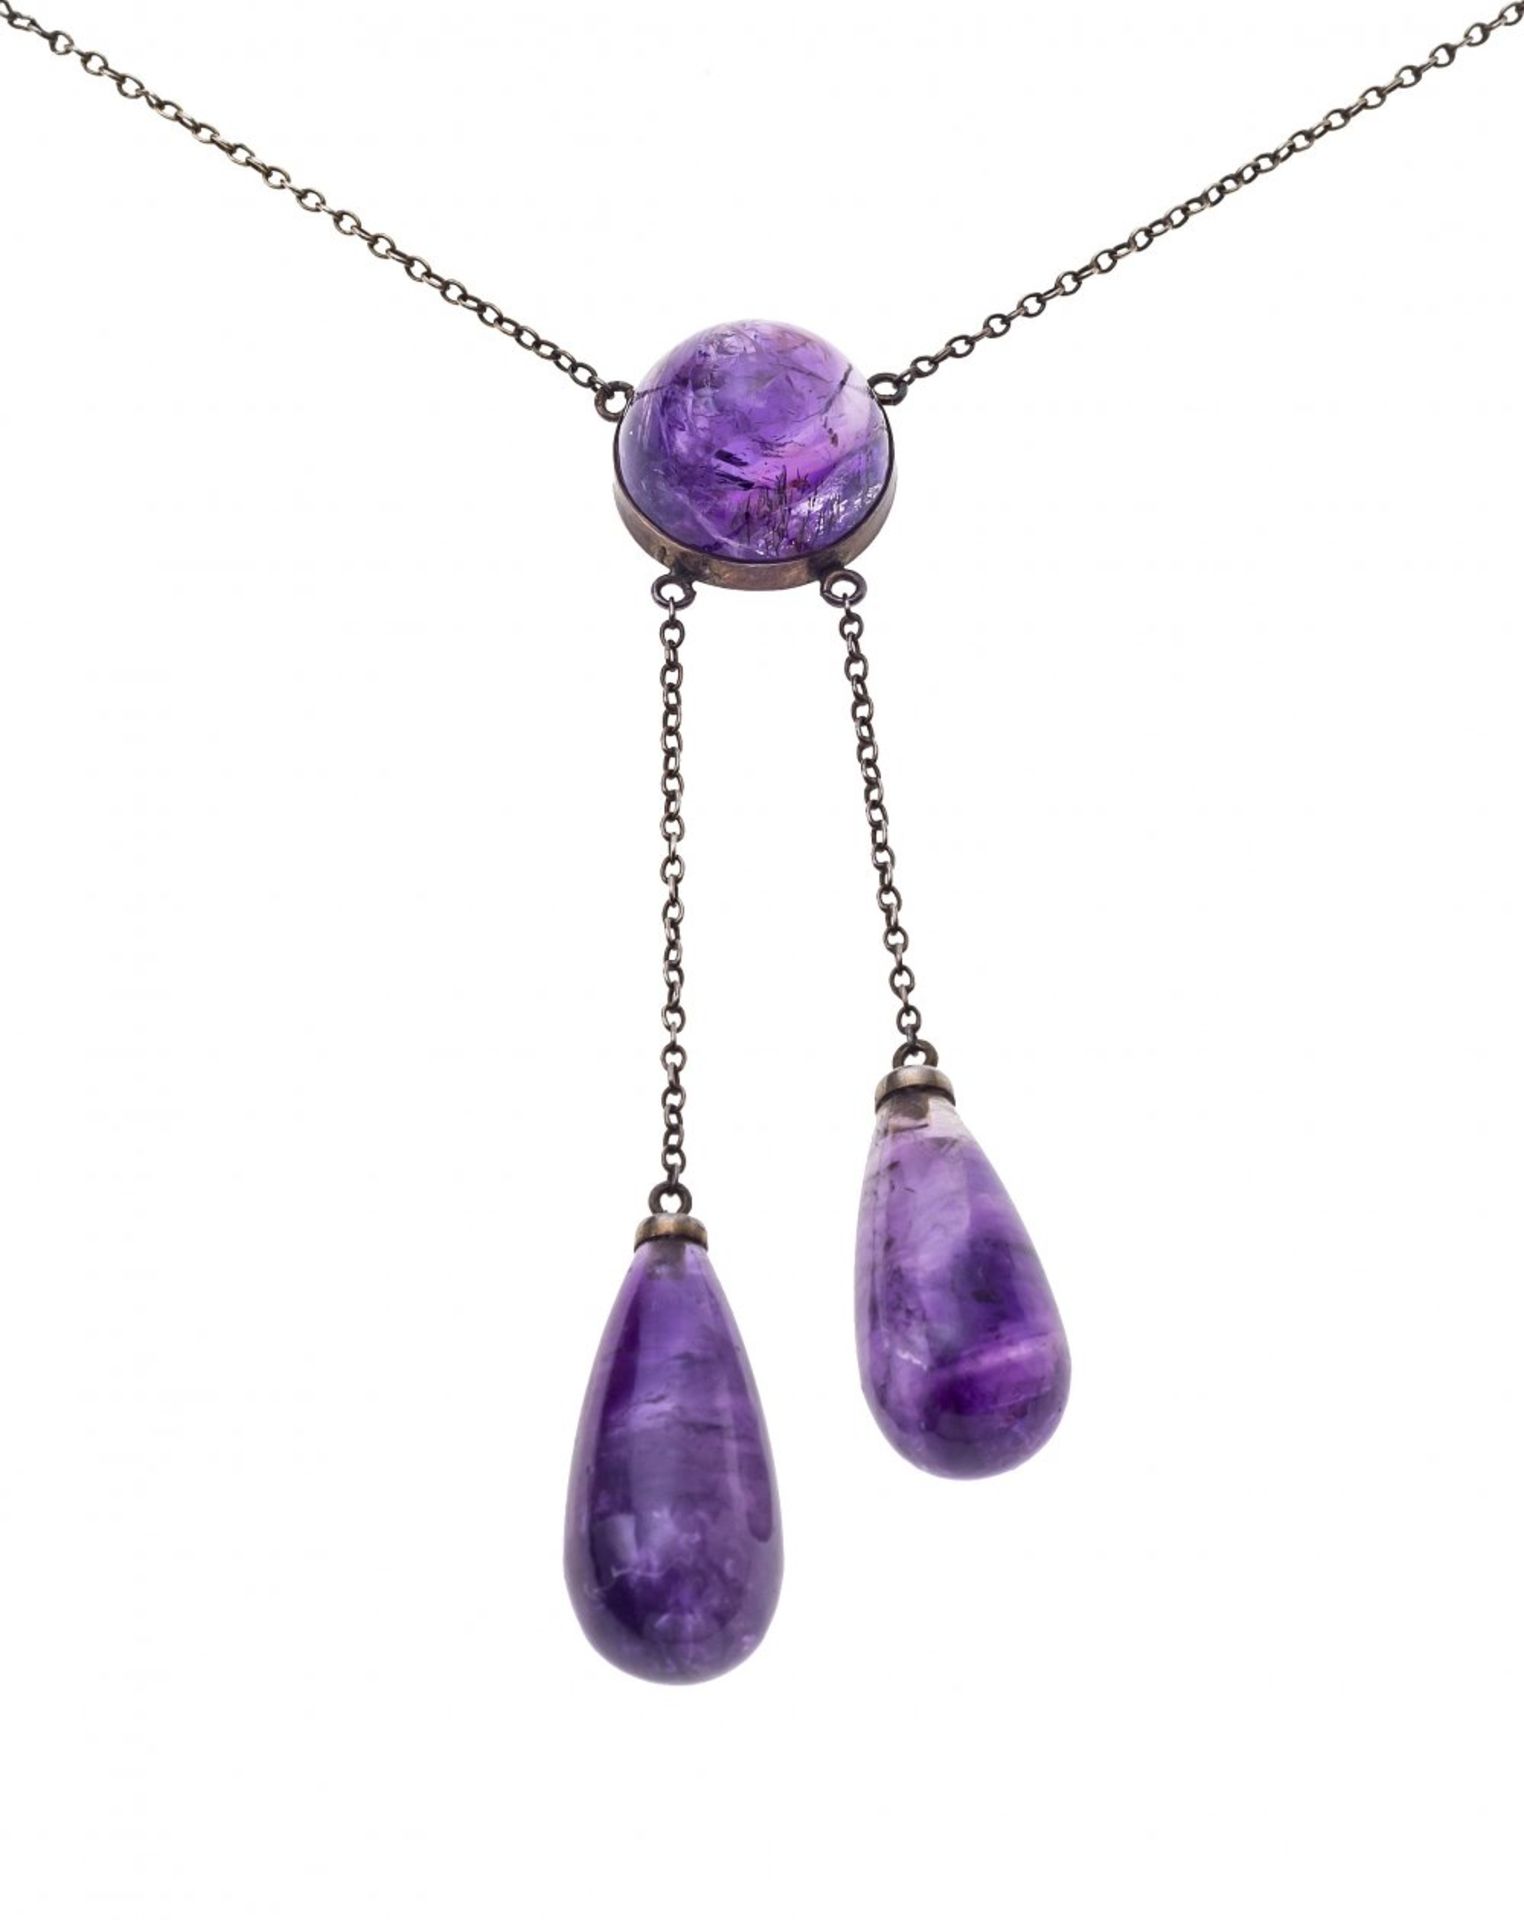 Chain with amethyst pendant